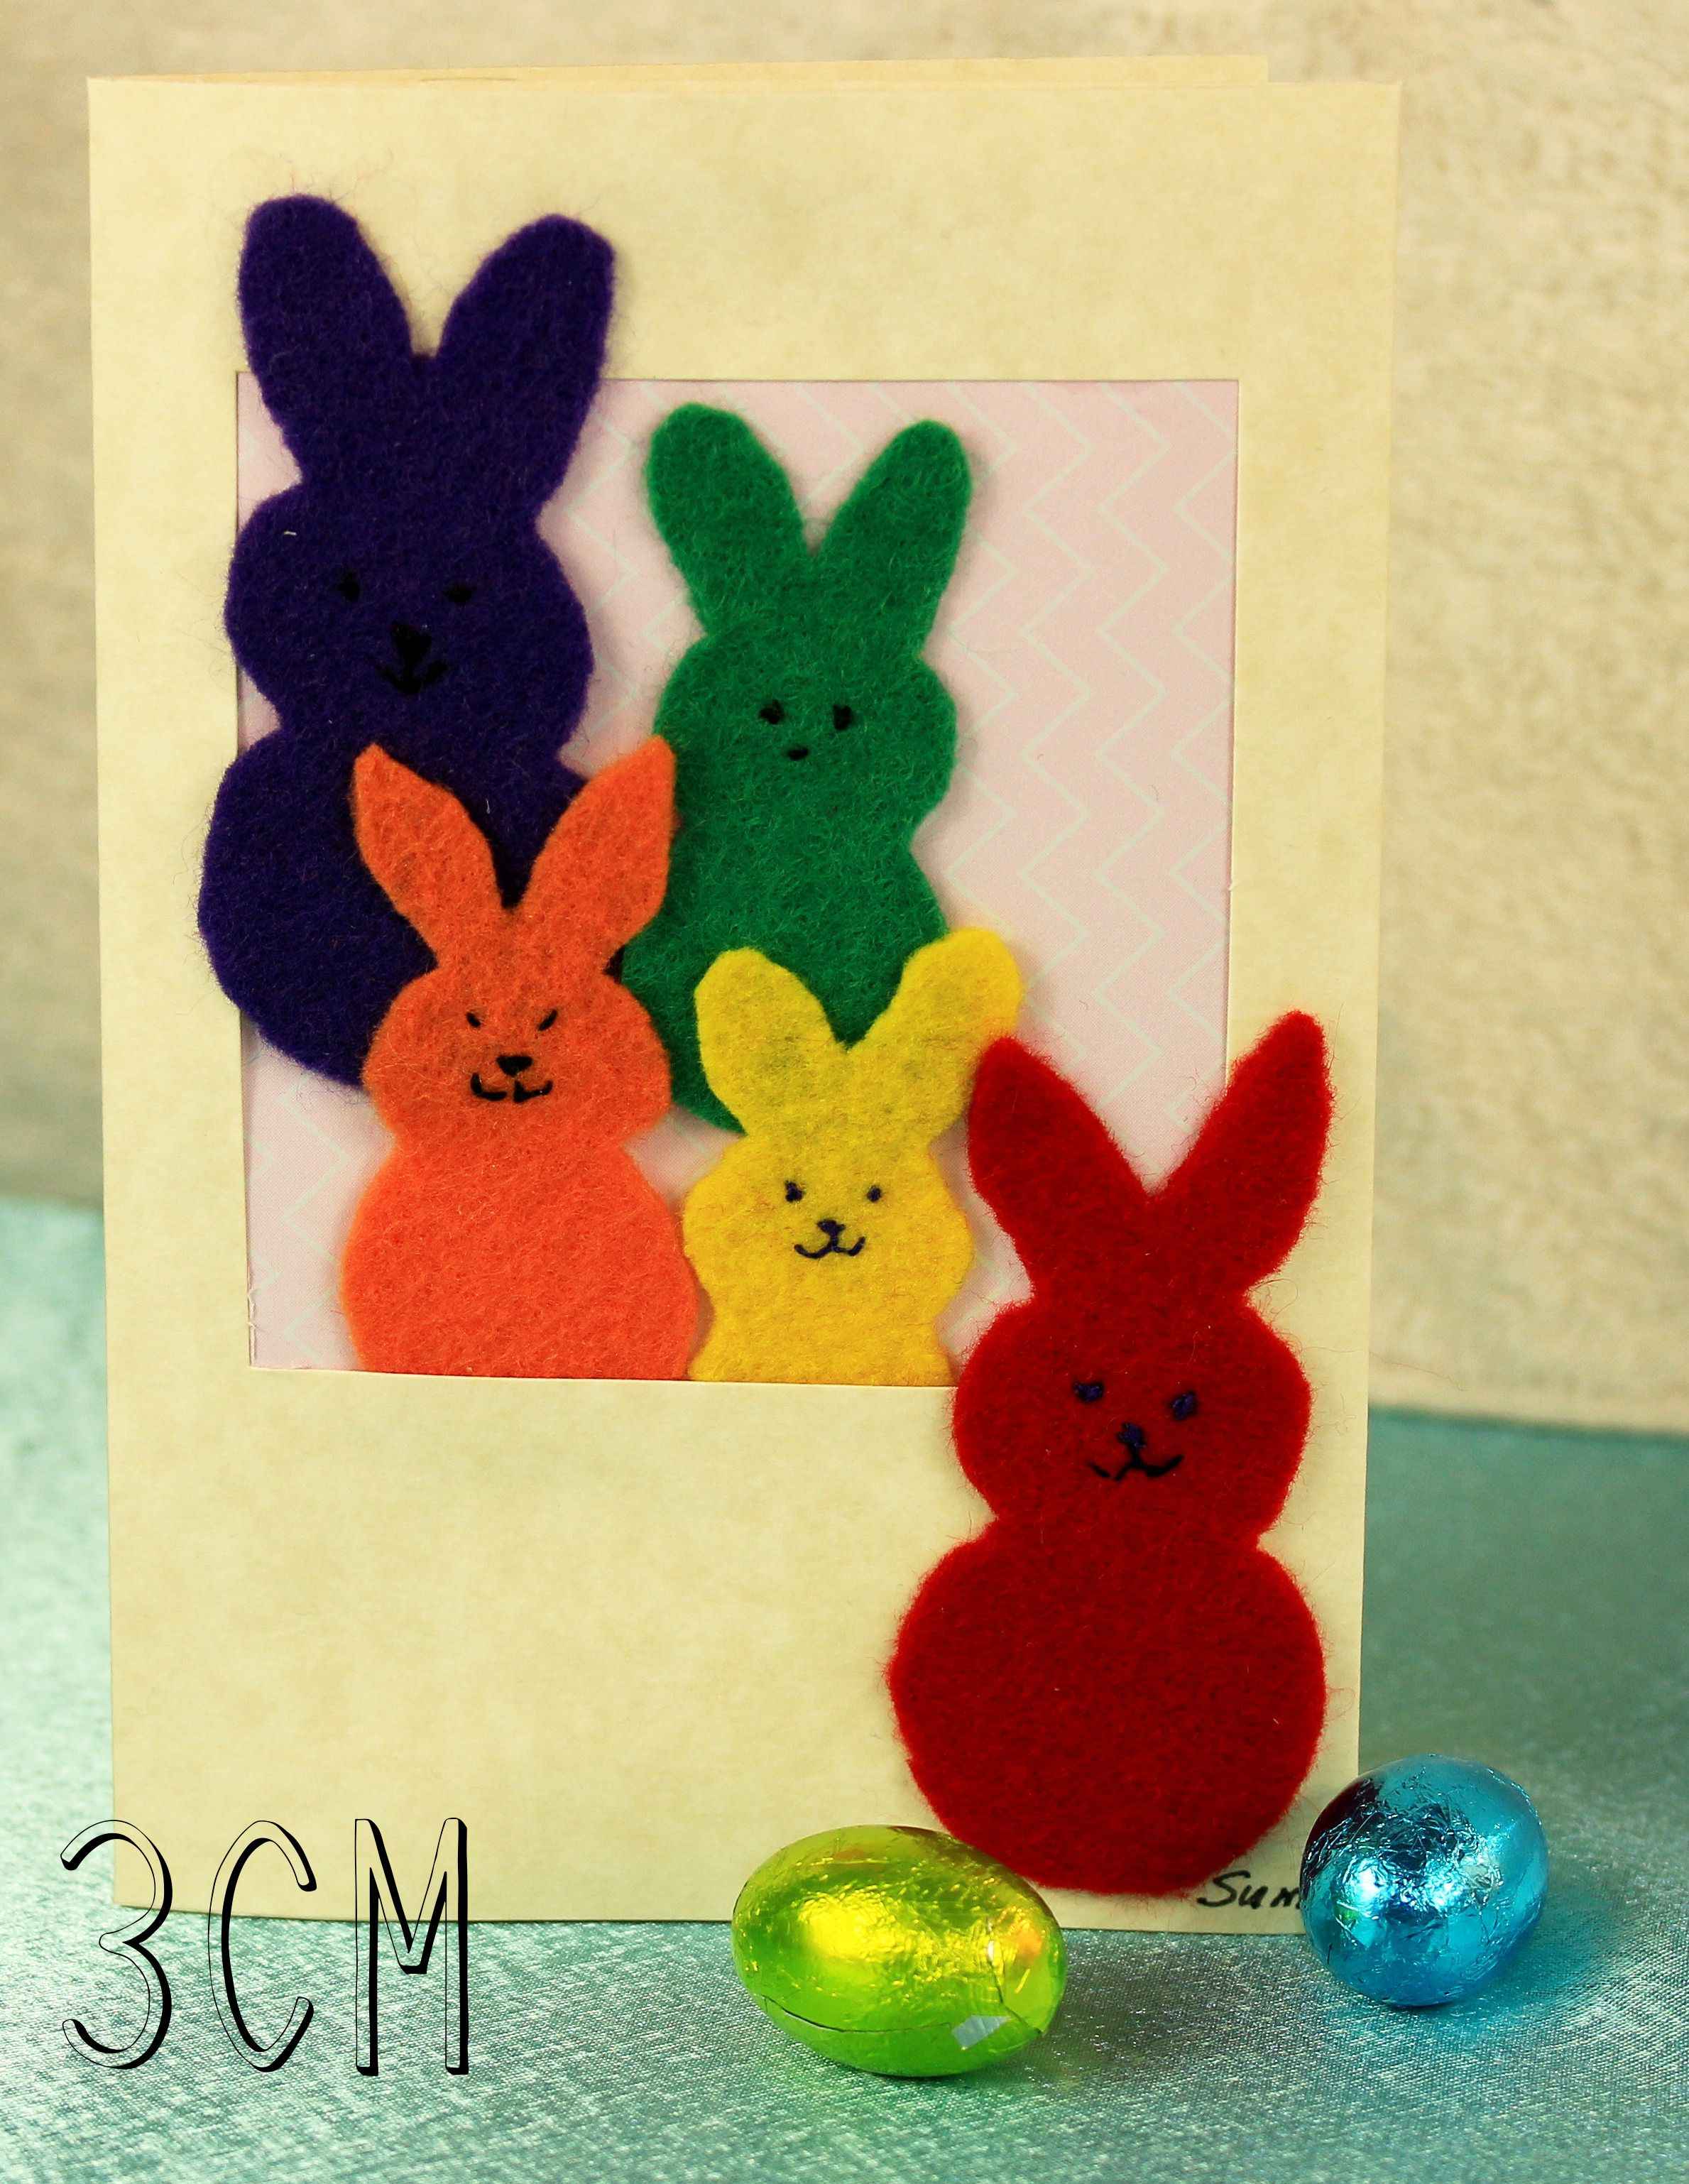 Cute Handmade Easter Card pack with Bunnies, Chicks, and Easter Eggs designed in felt, cross-stitch and paper